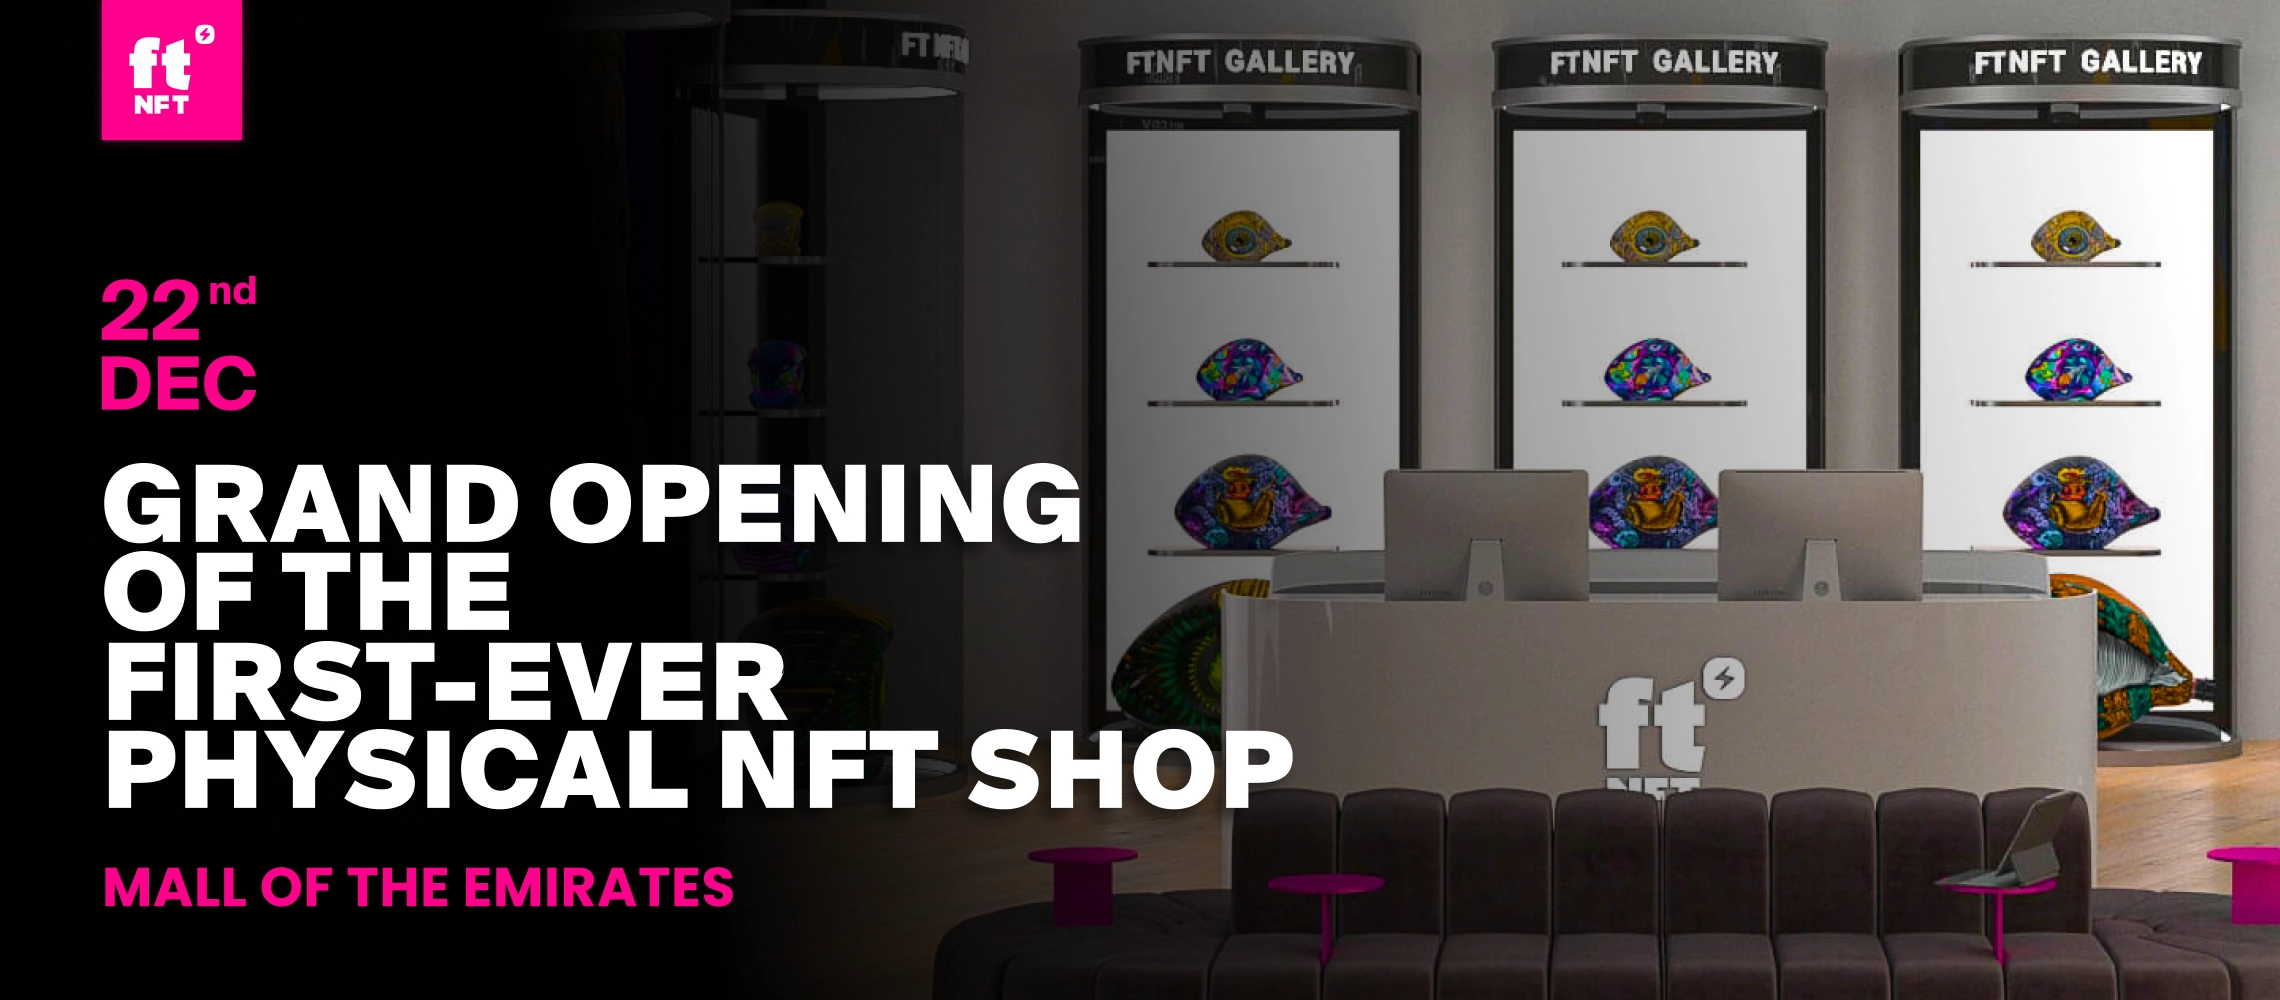 The Grand Opening of the ftNFT Shop, on December 22nd, in Dubai